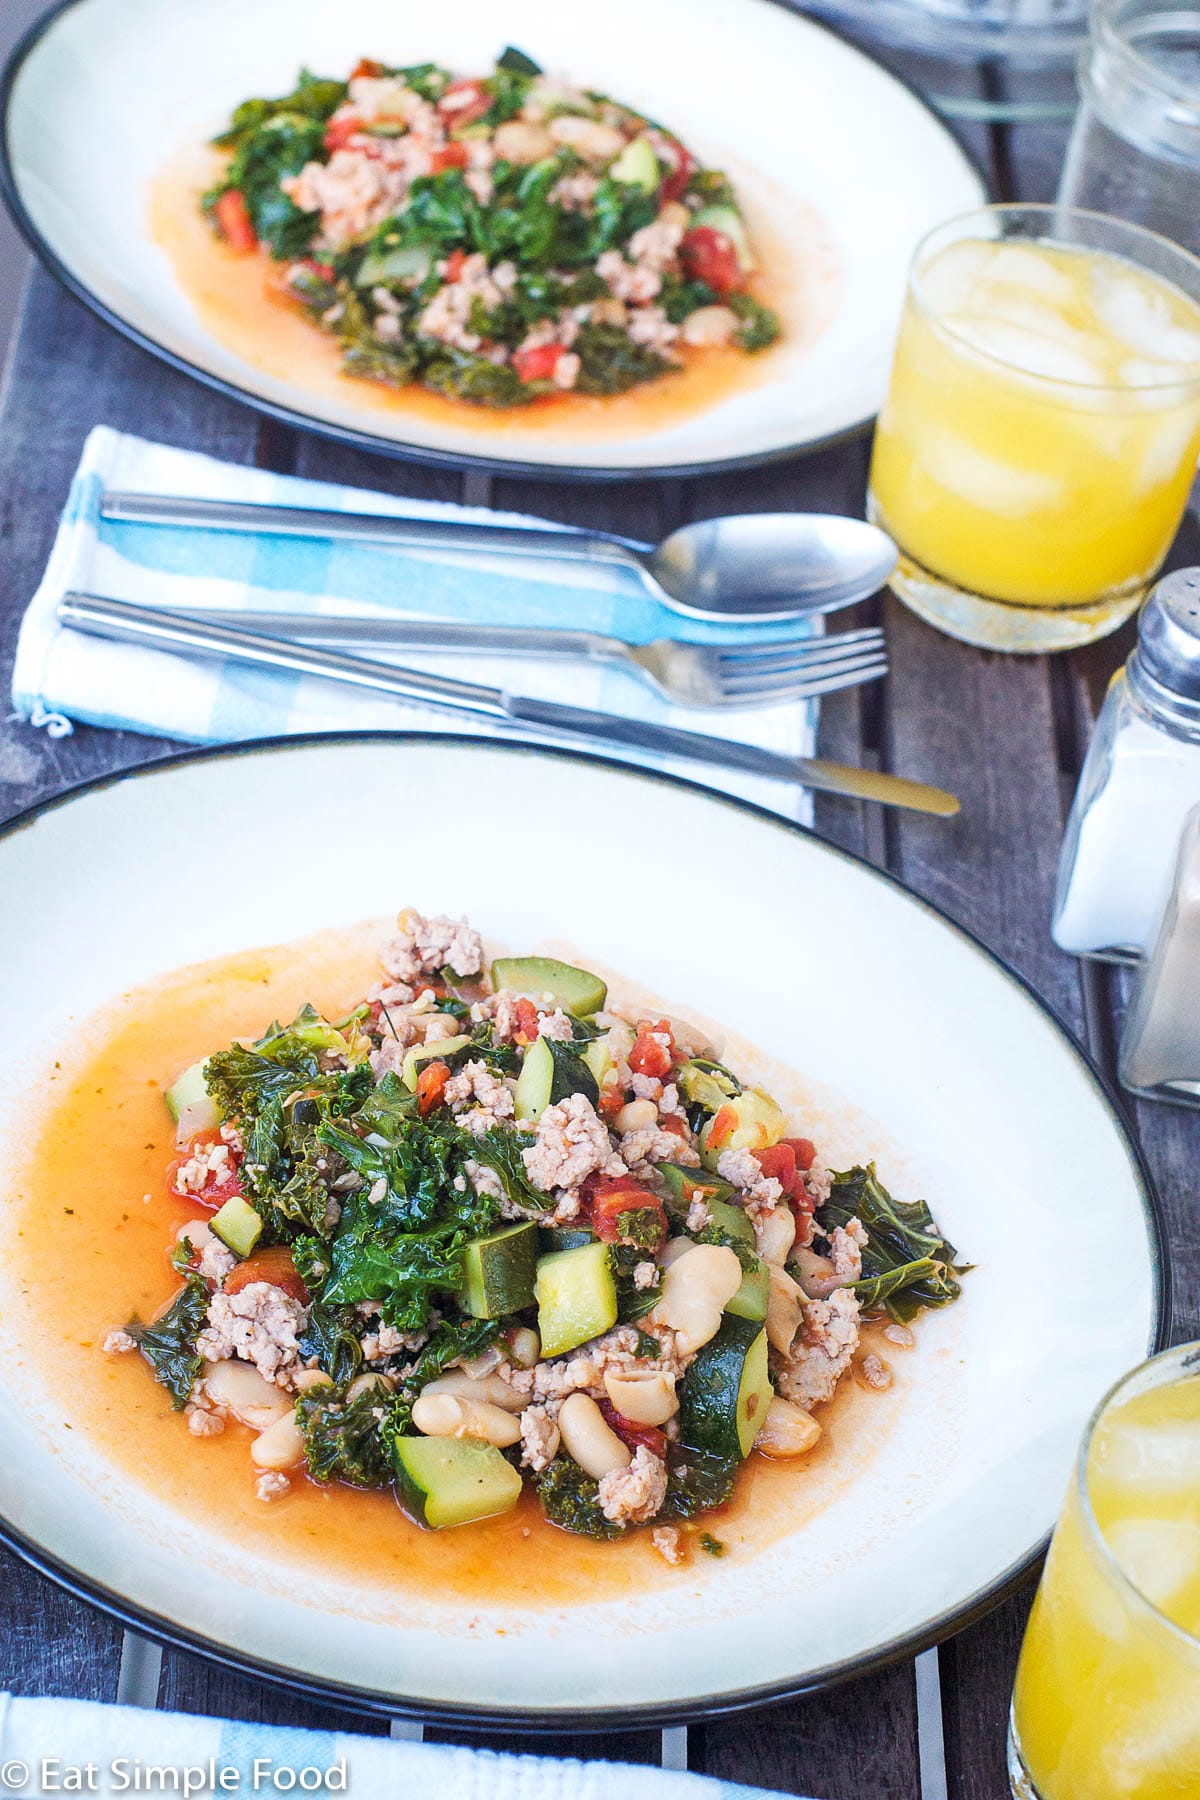 Ground sausage, chunks of kale, diced zucchini, tomatoes, and white beans on two white plates with silverware and orange drinks.